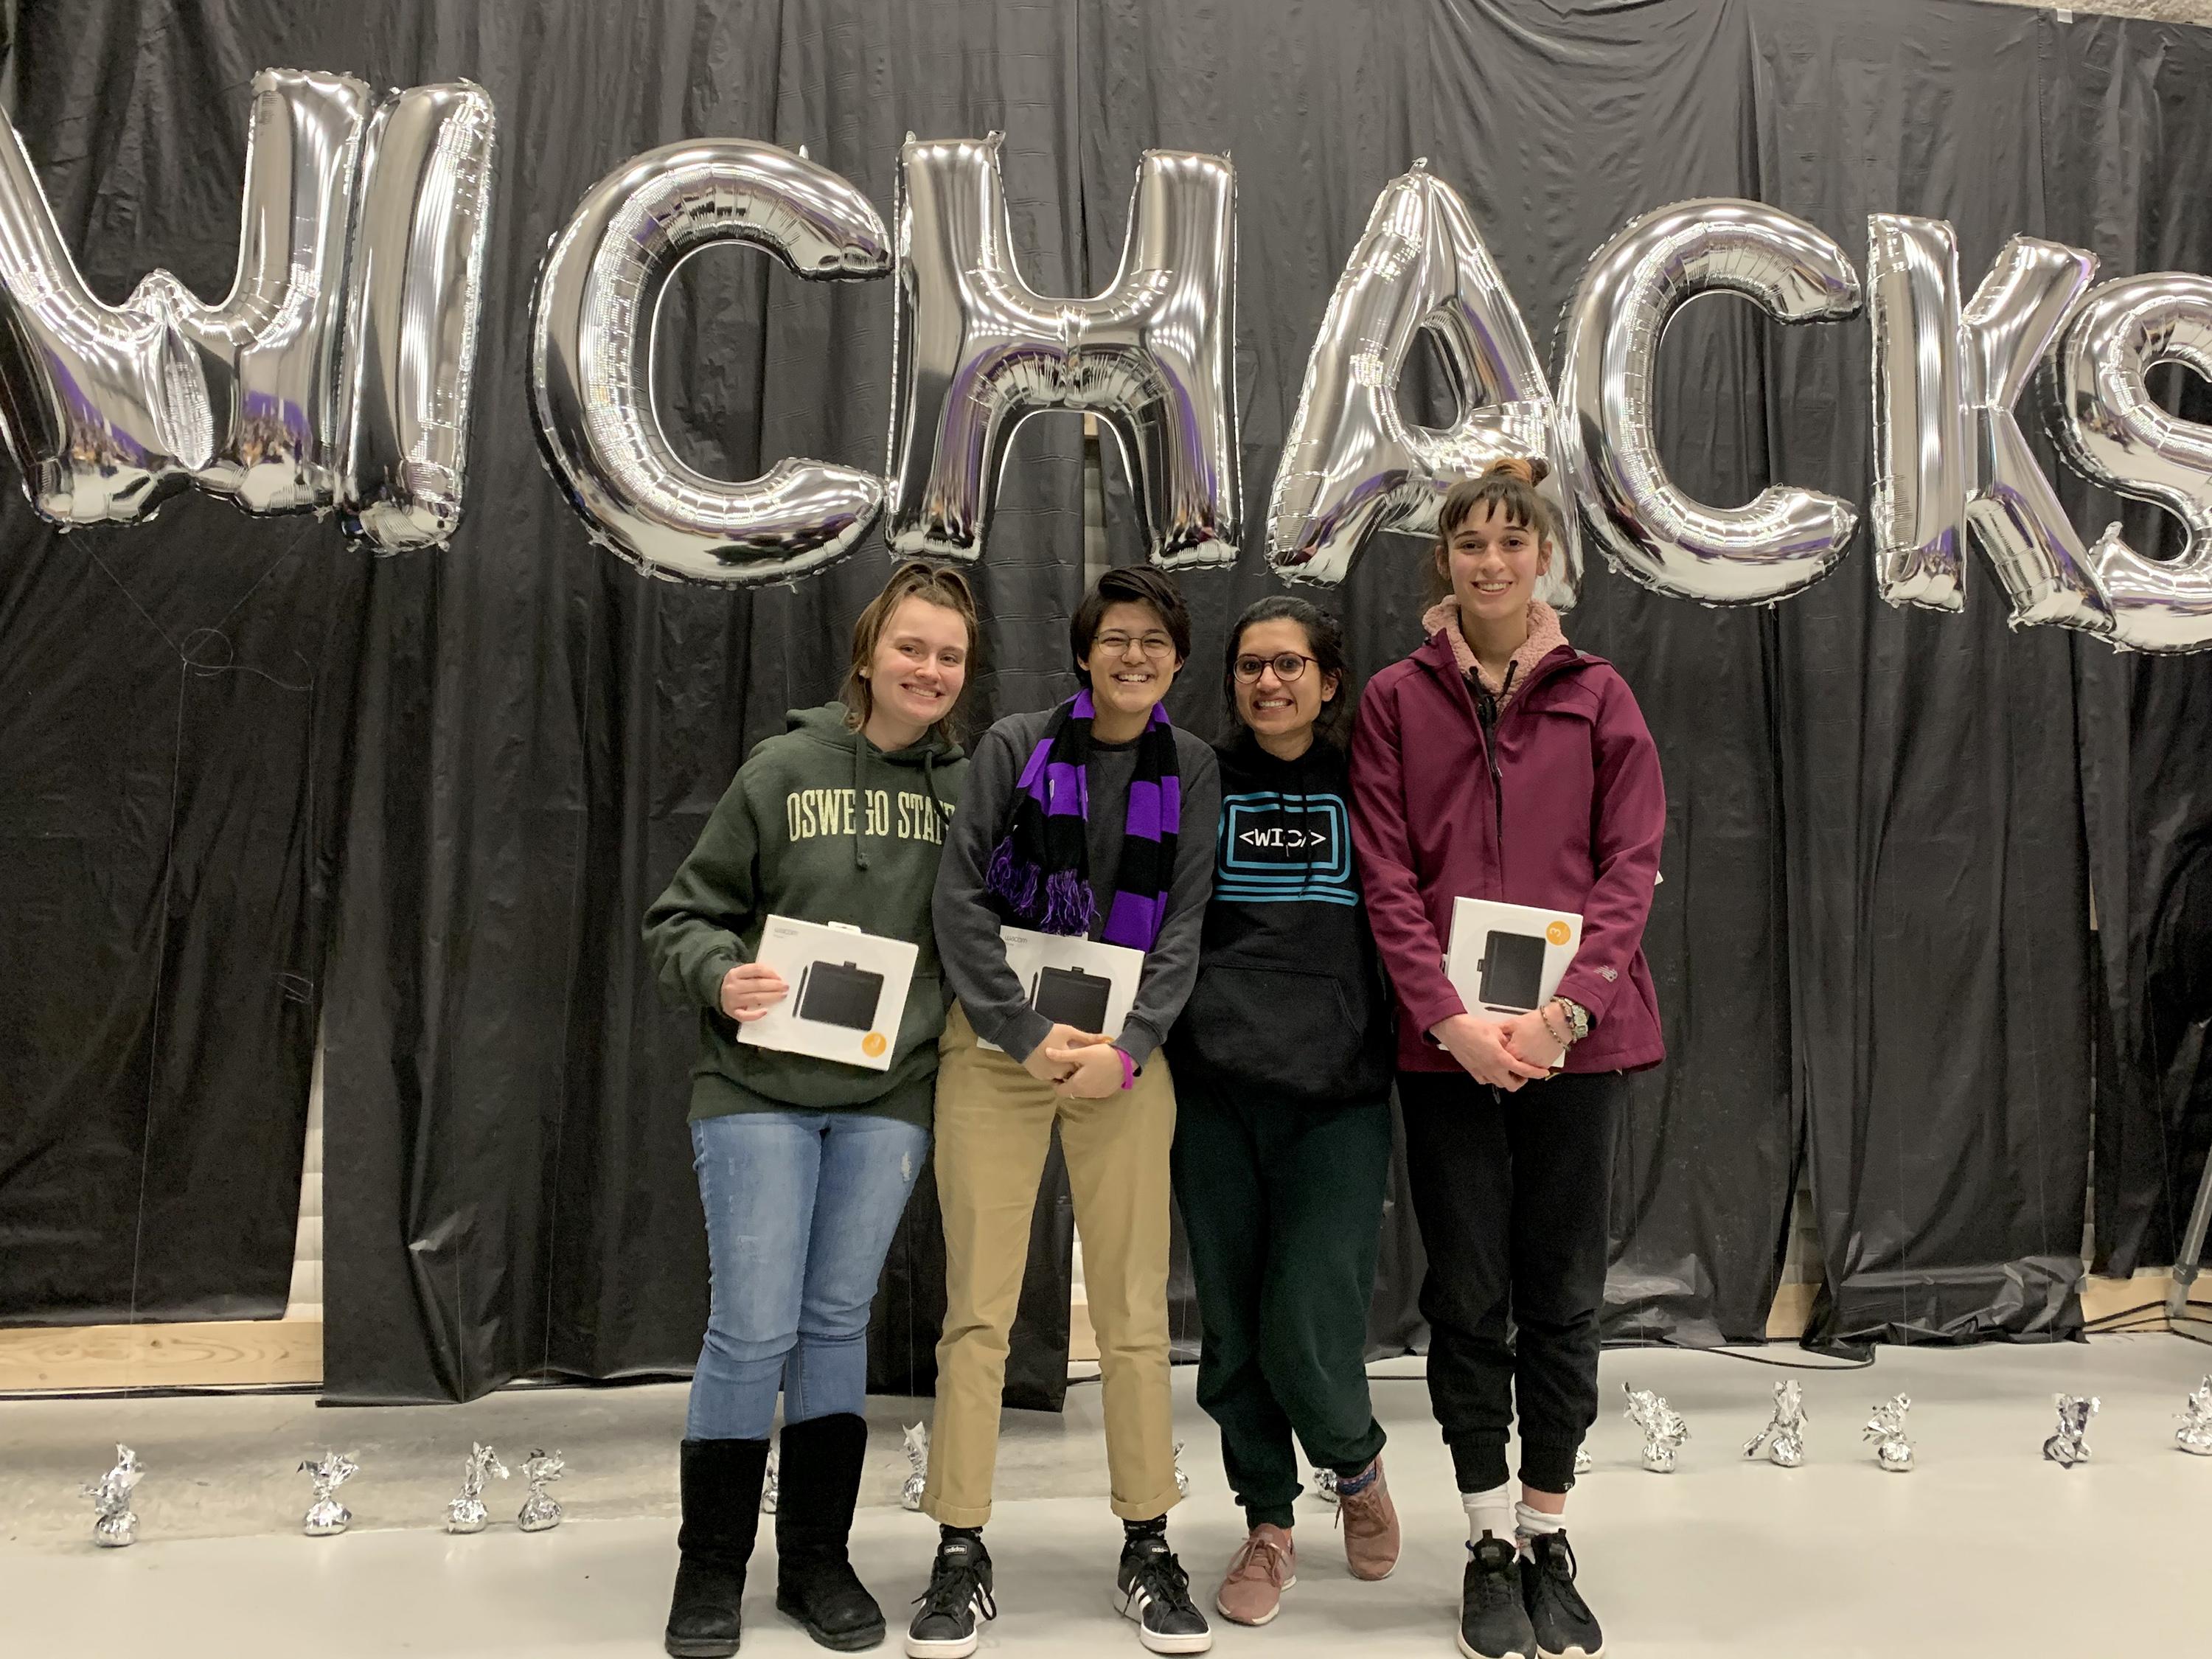 SUNY Oswego team members who won award at hackathon for their inclusive TRANSition app